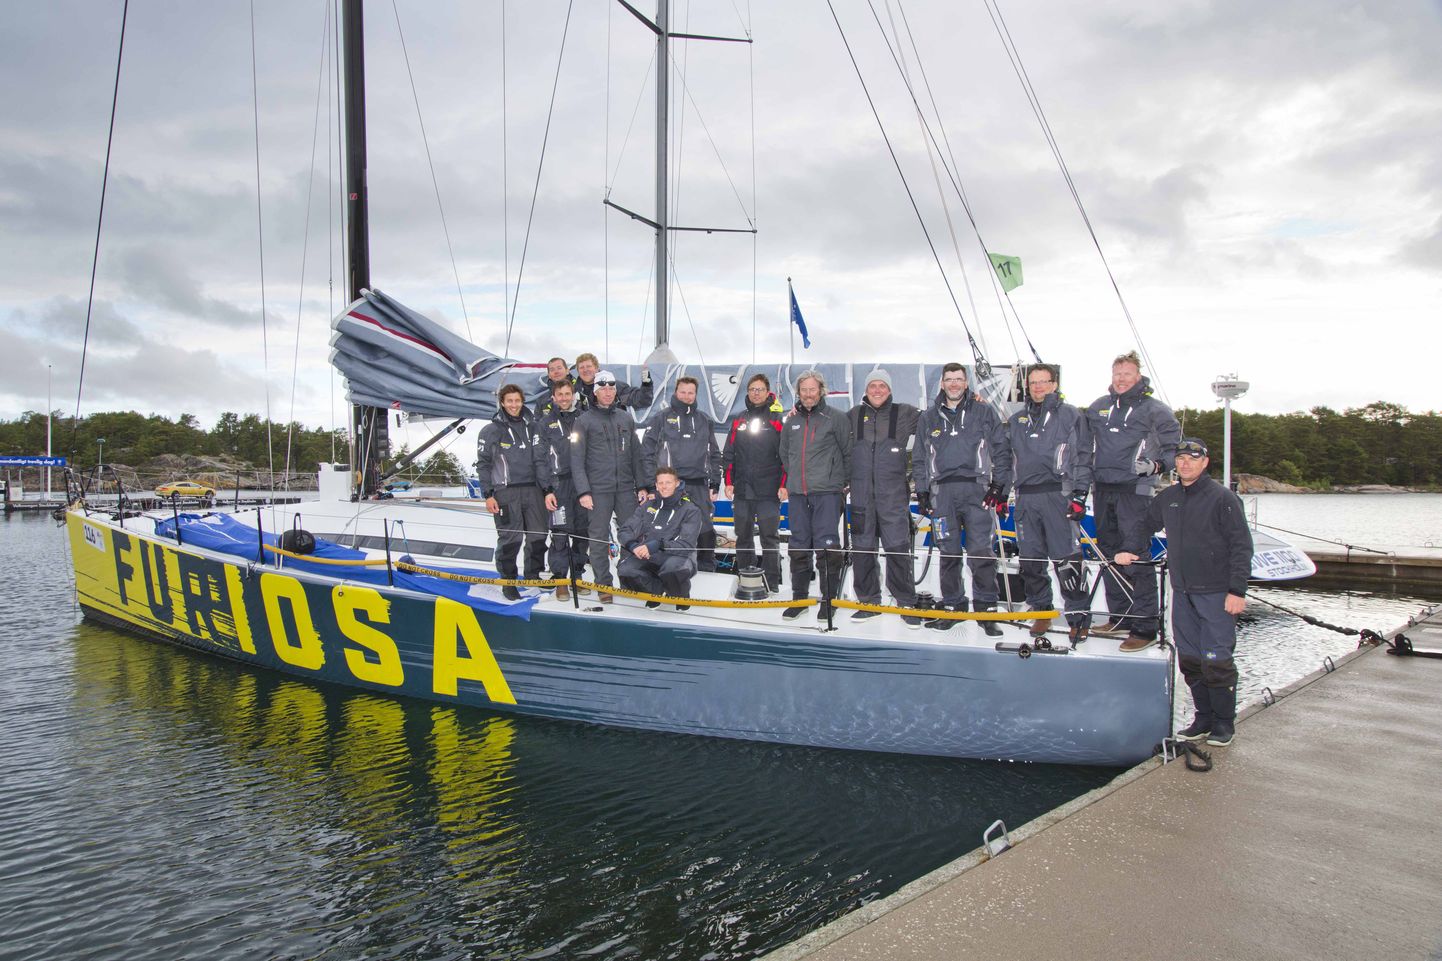 Furiosa meeskond AF Offshore Race'il